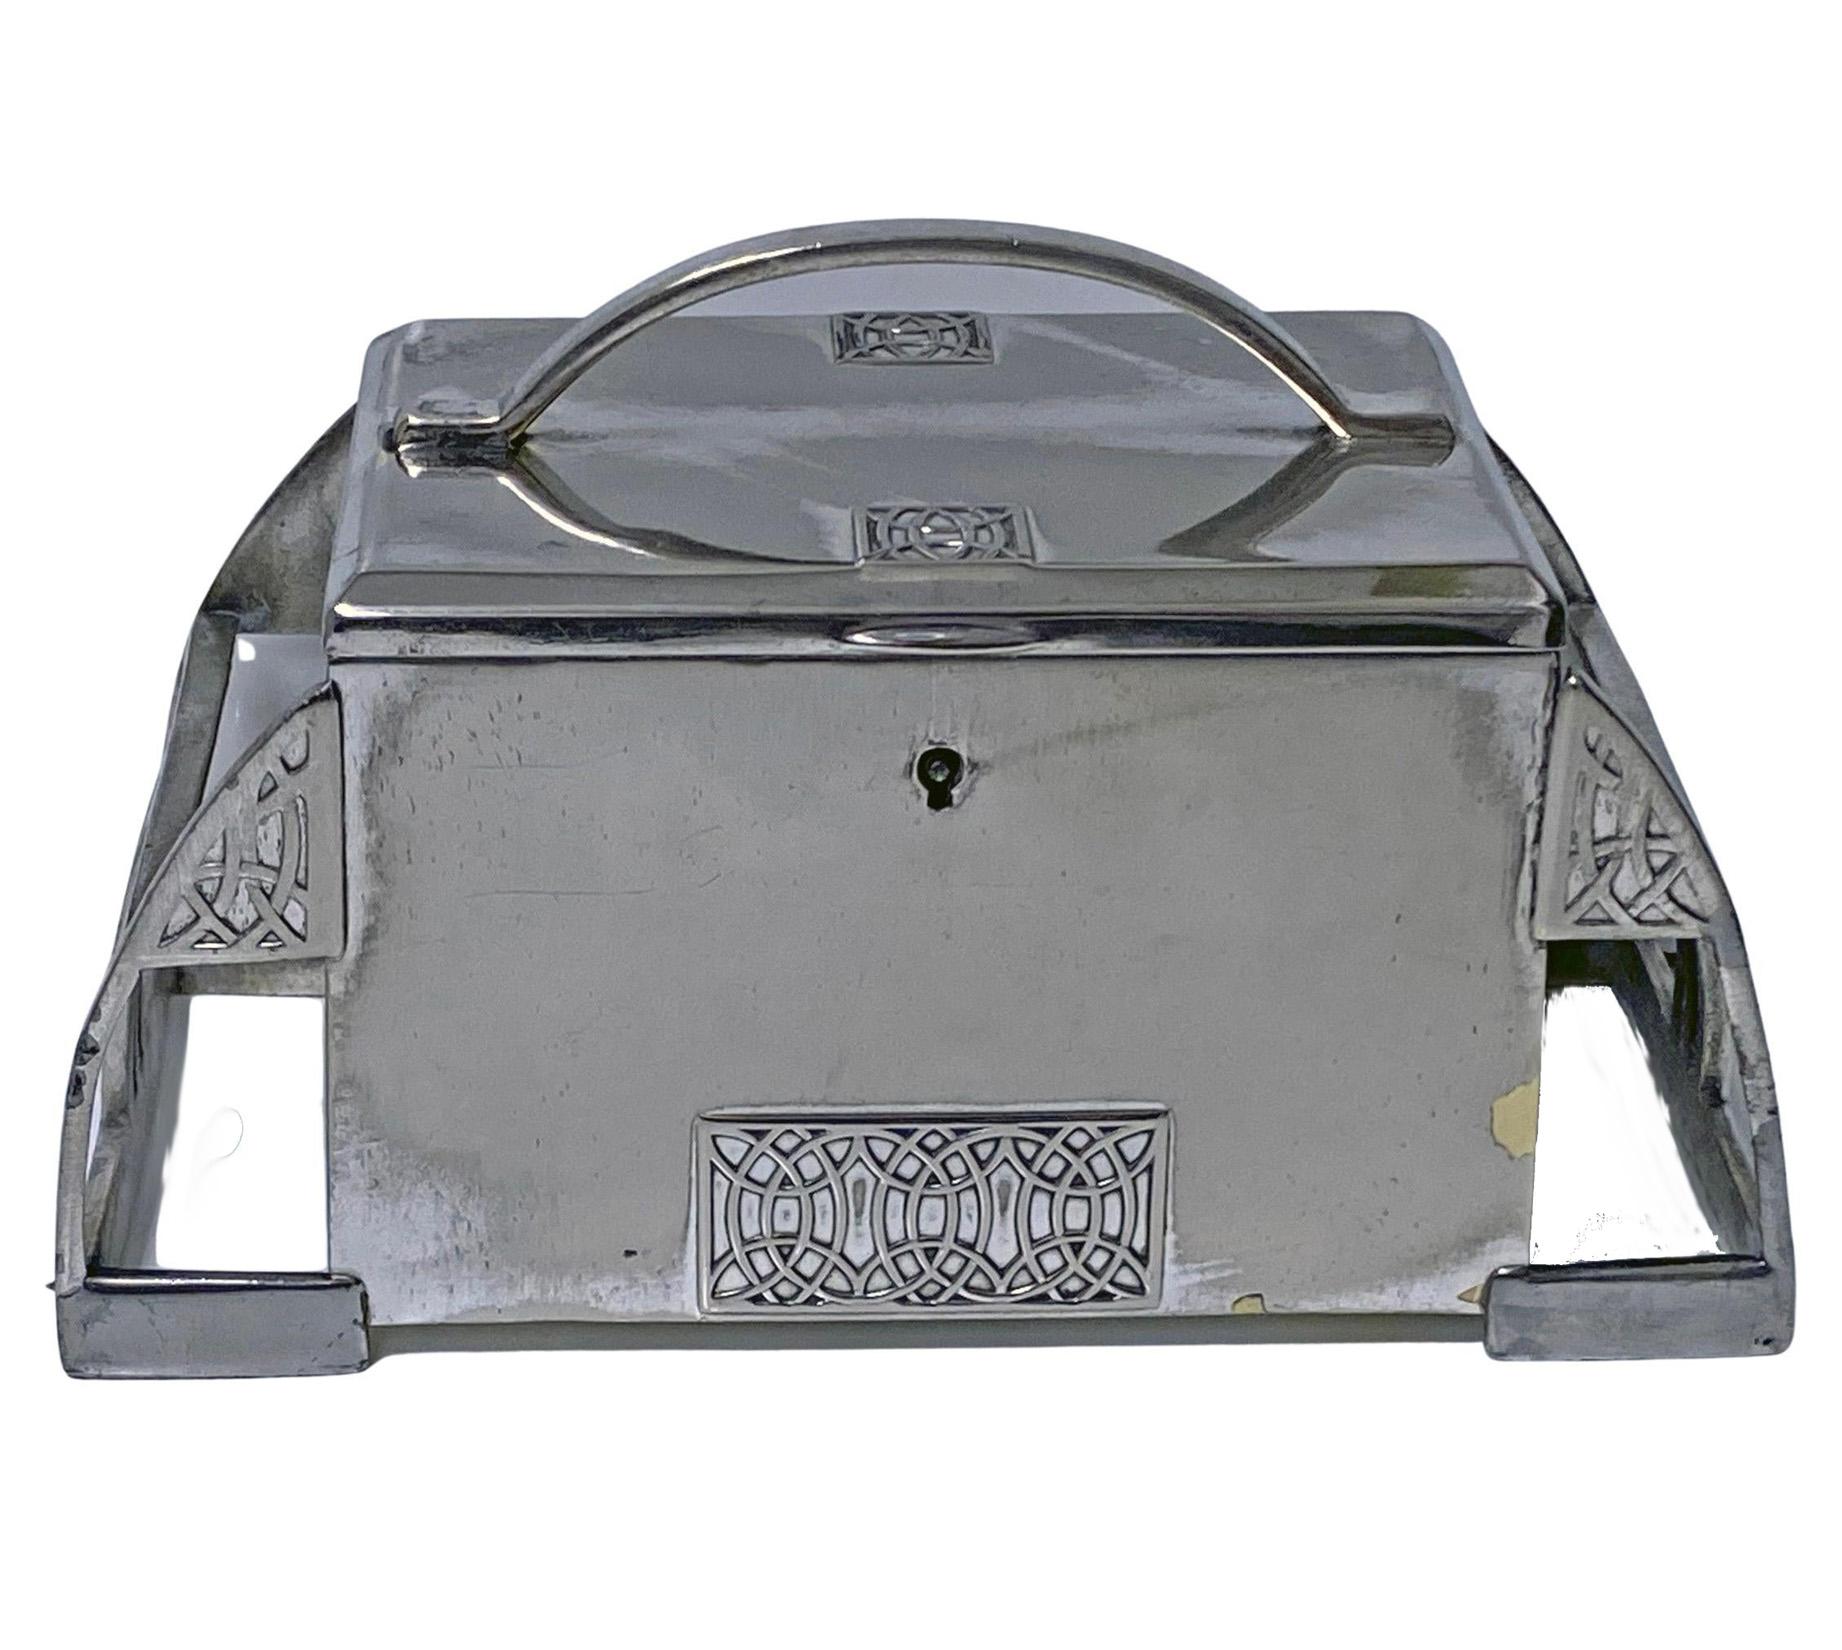 WMF Jugendstil secessionist silvered pewter Box Germany, circa 1900. The box of a rare design, rectangular arch like shape \hinged cover with hemispherical handle; the sides of a geometric bracket divisional form. The box decorated with arts and